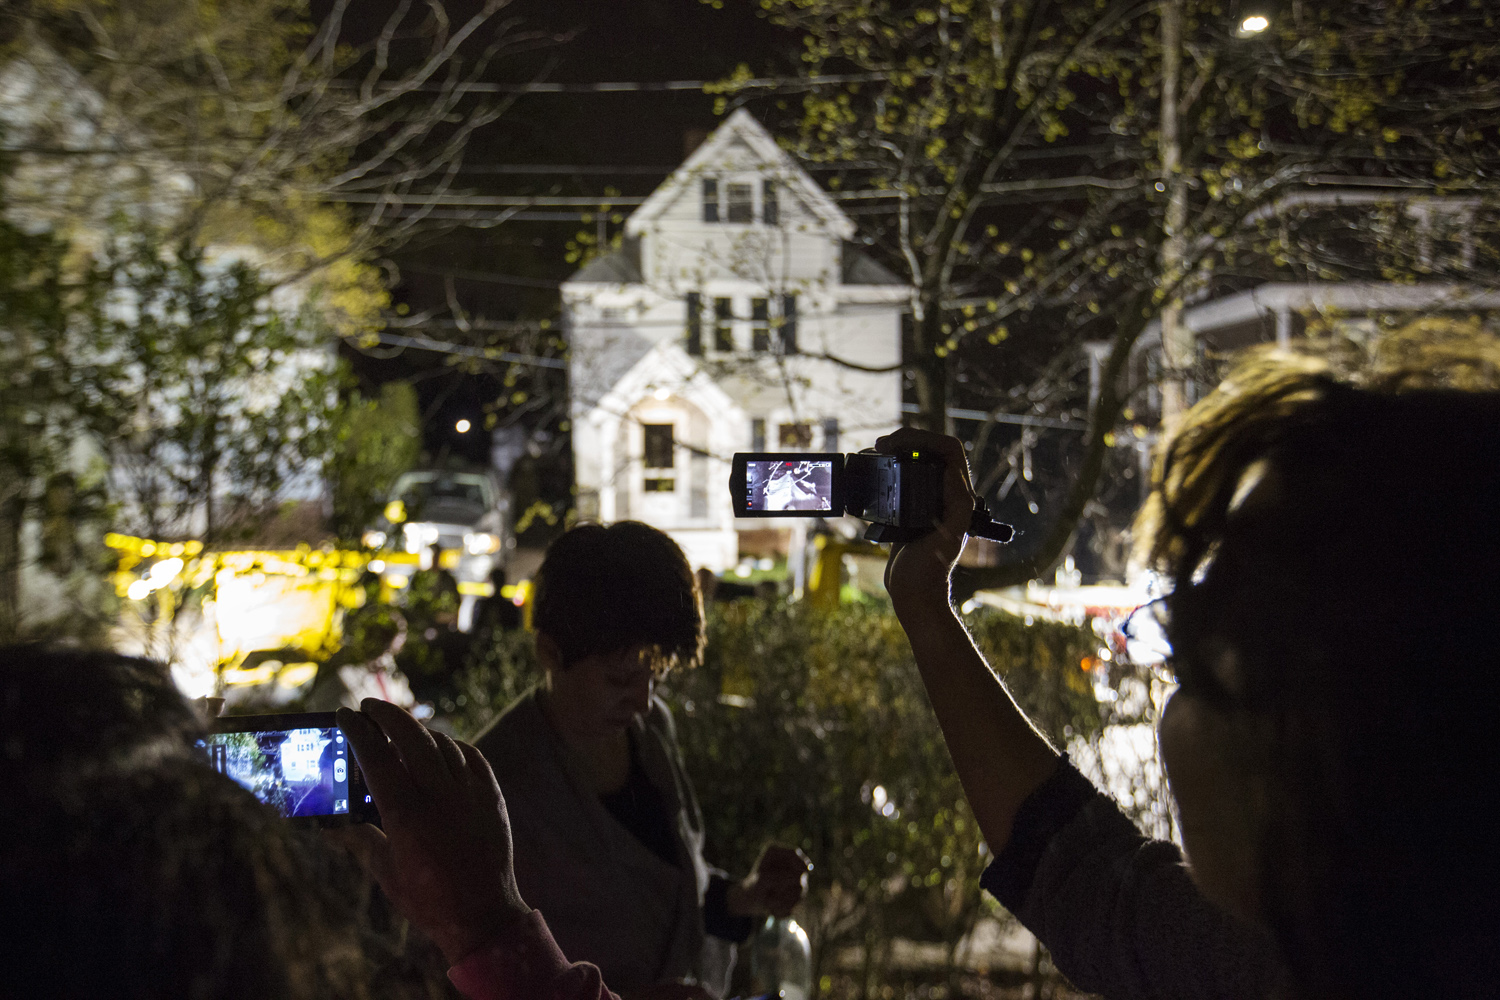 Neighbors use cameras to record images of the boat at 67 Franklin St. where Dzhokhar Tsarnaev, suspect in Boston Marathon bombings, was hiding inside in Watertown